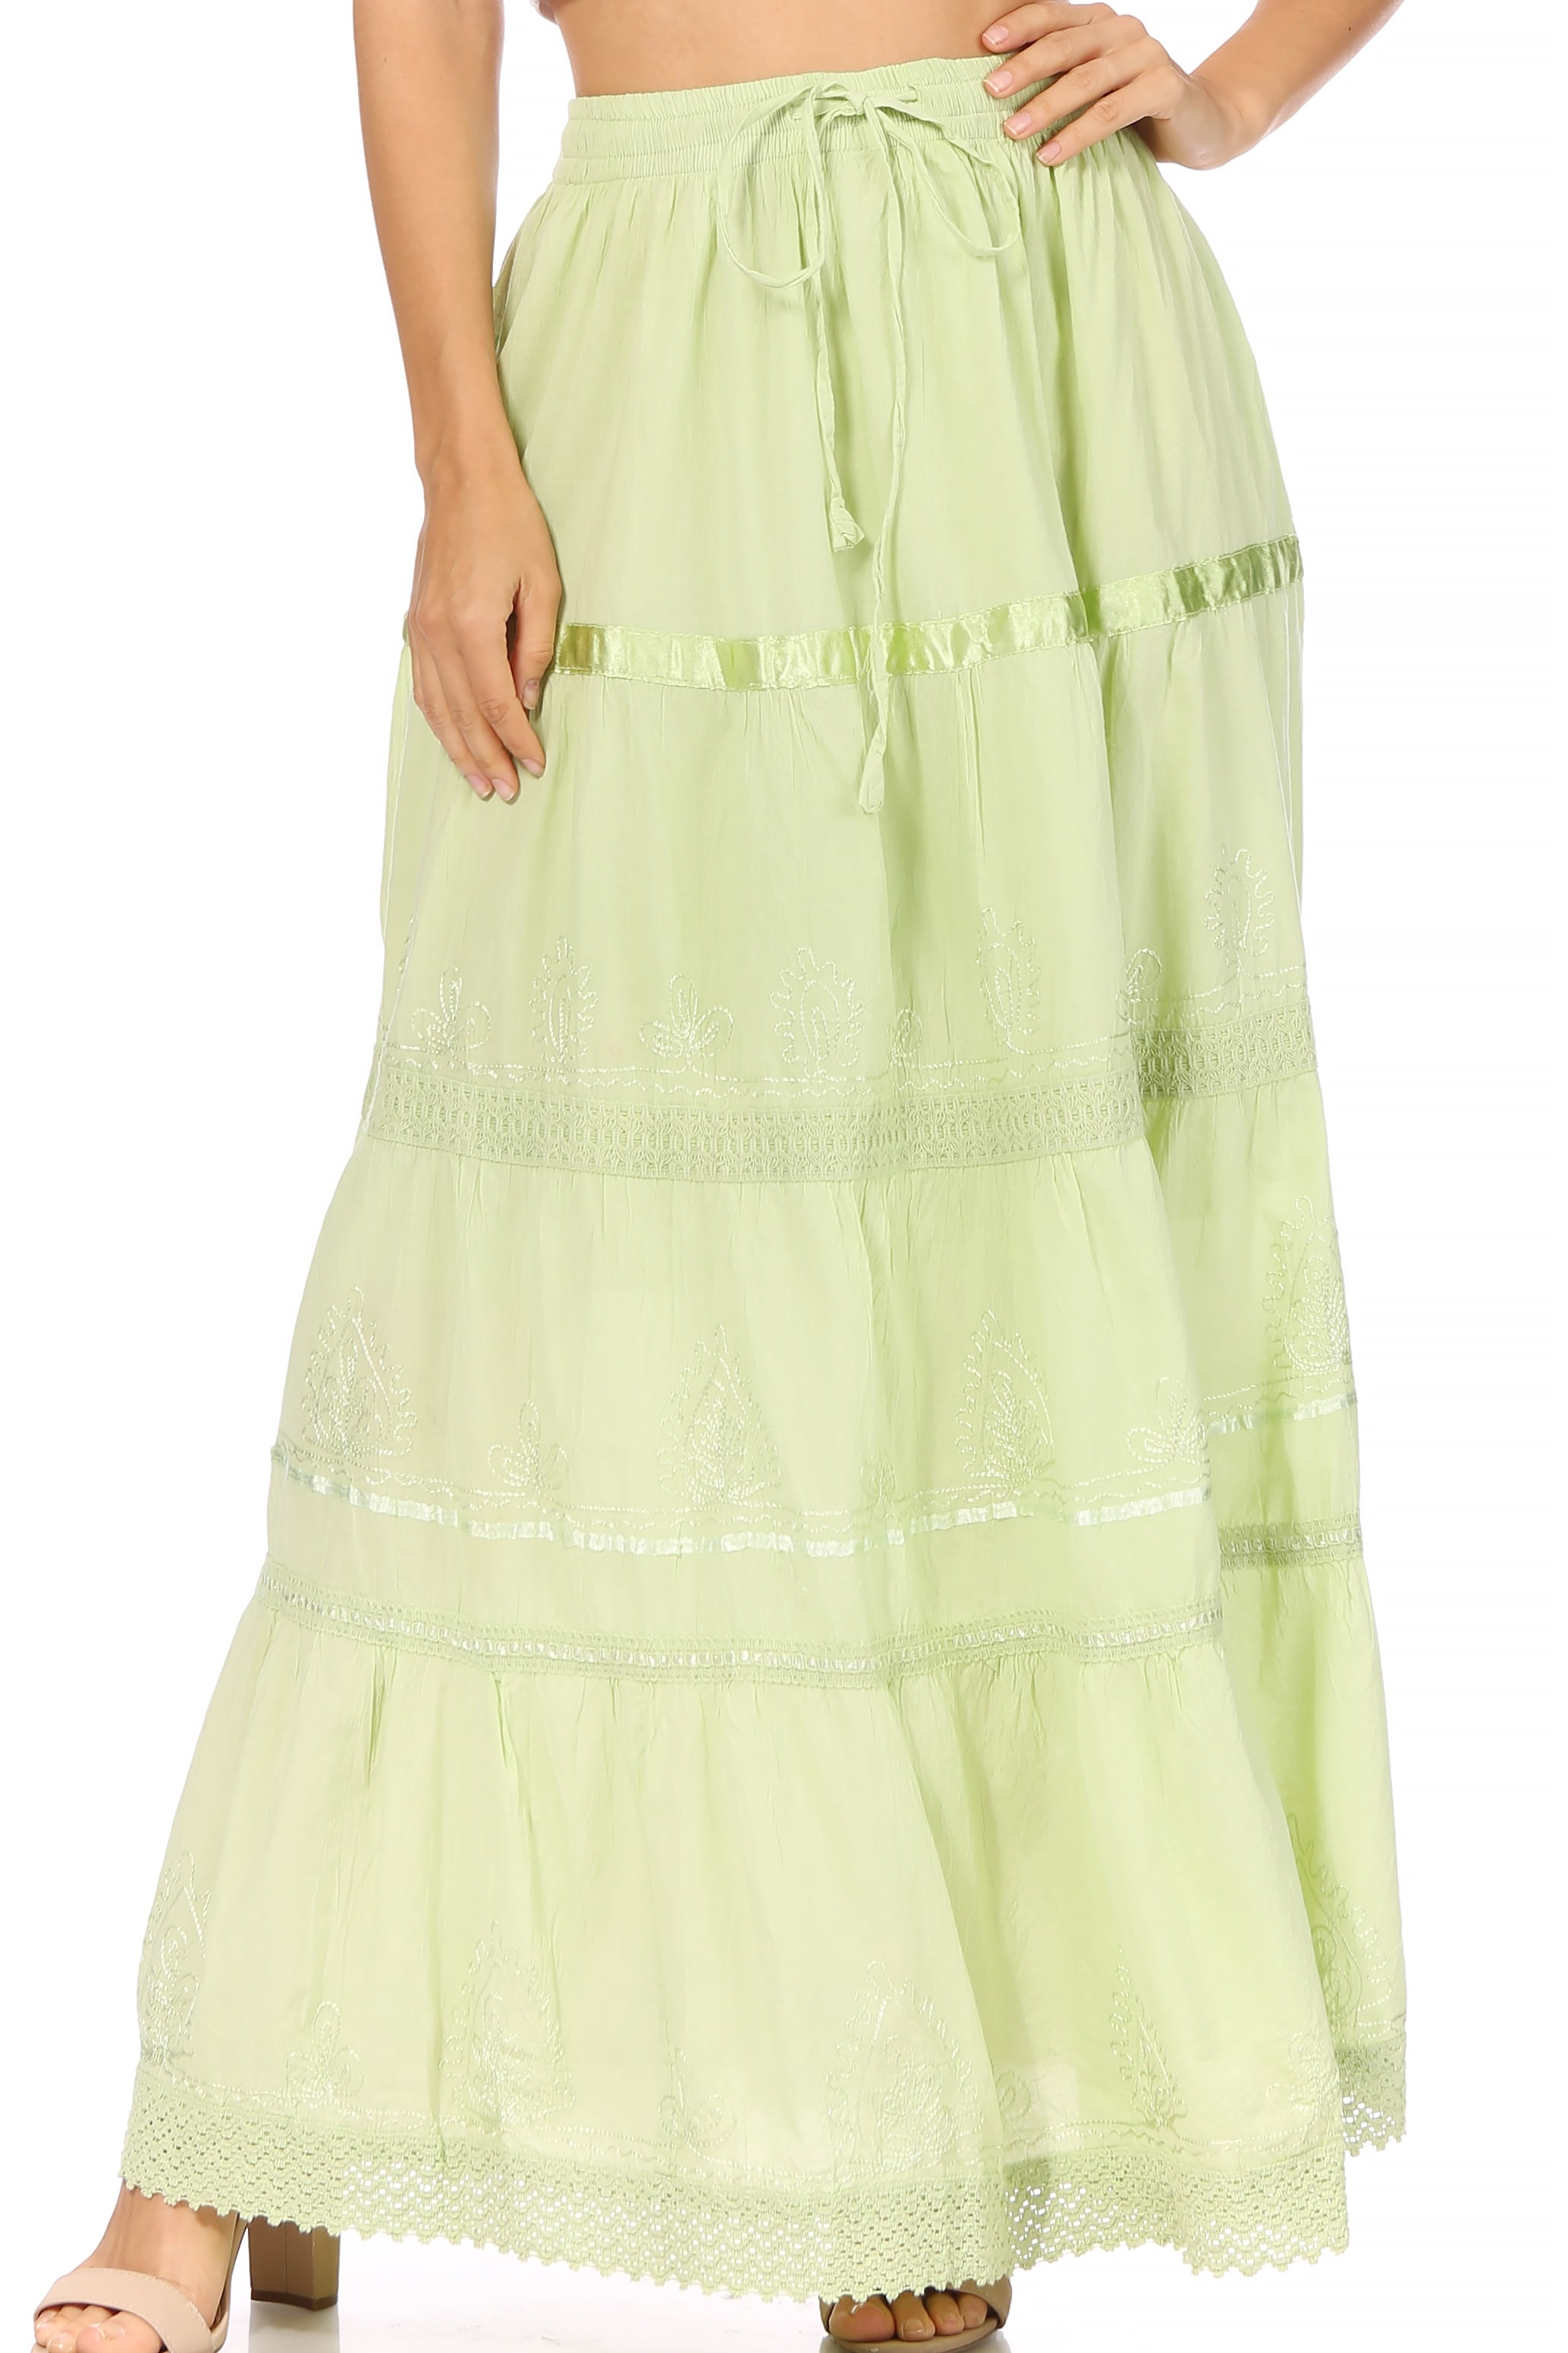 Sakkas Solid Embroidered Gypsy / Bohemian Full / Maxi / Long Cotton Skirt -  Spring Green - One Size - Walmart.com